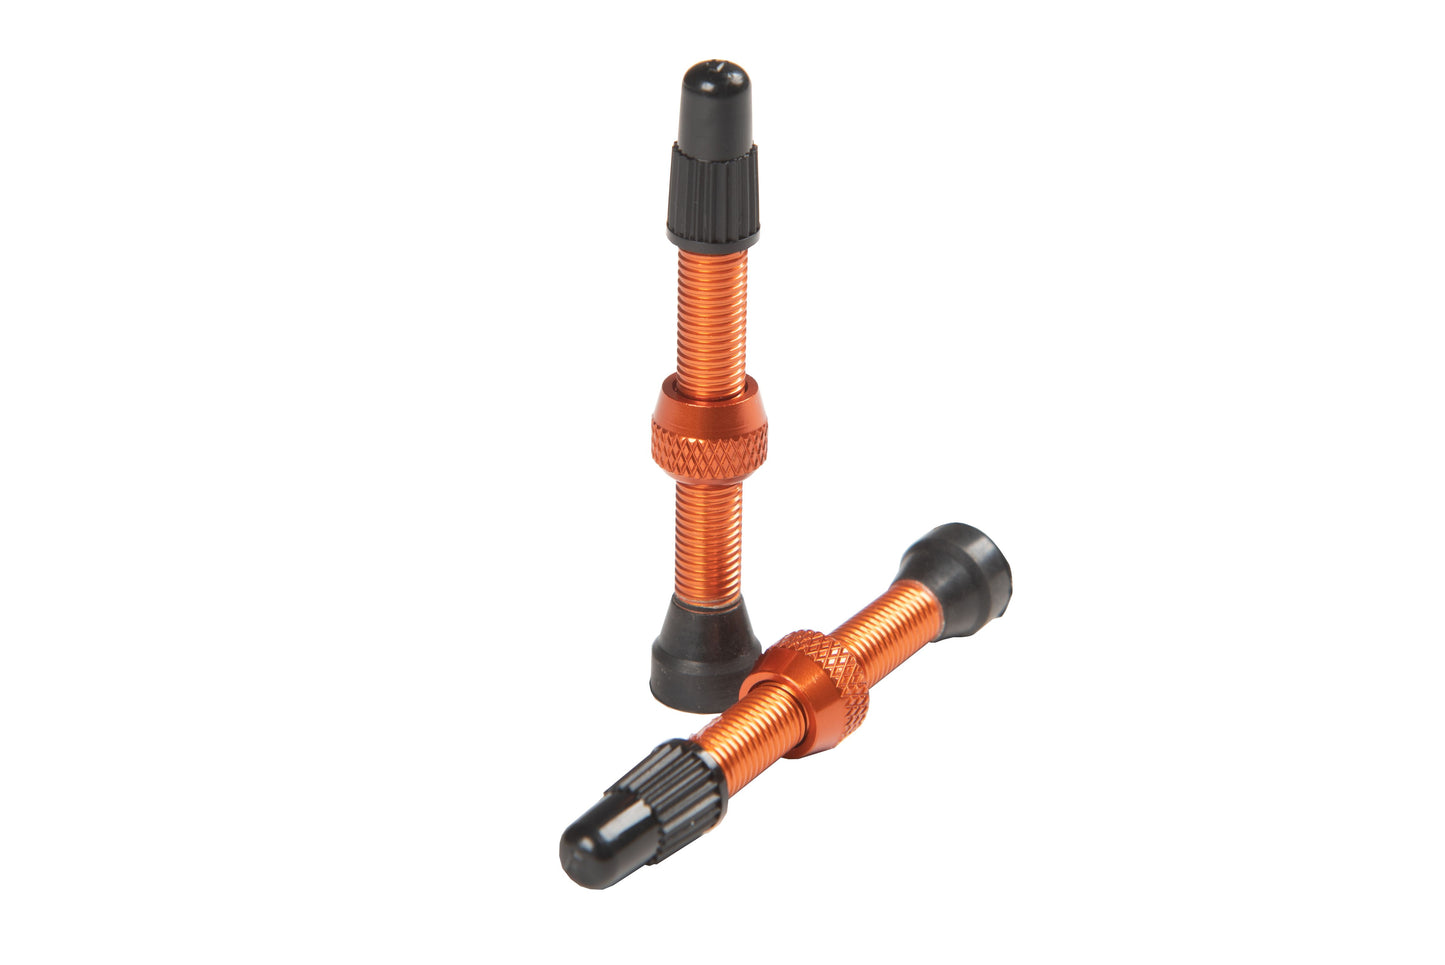 Stan's No Tubes Tubeless Valve Stems Presta Valve in Orange Finish Color | Bicycle Tubeless Technology from Sprocket Kings